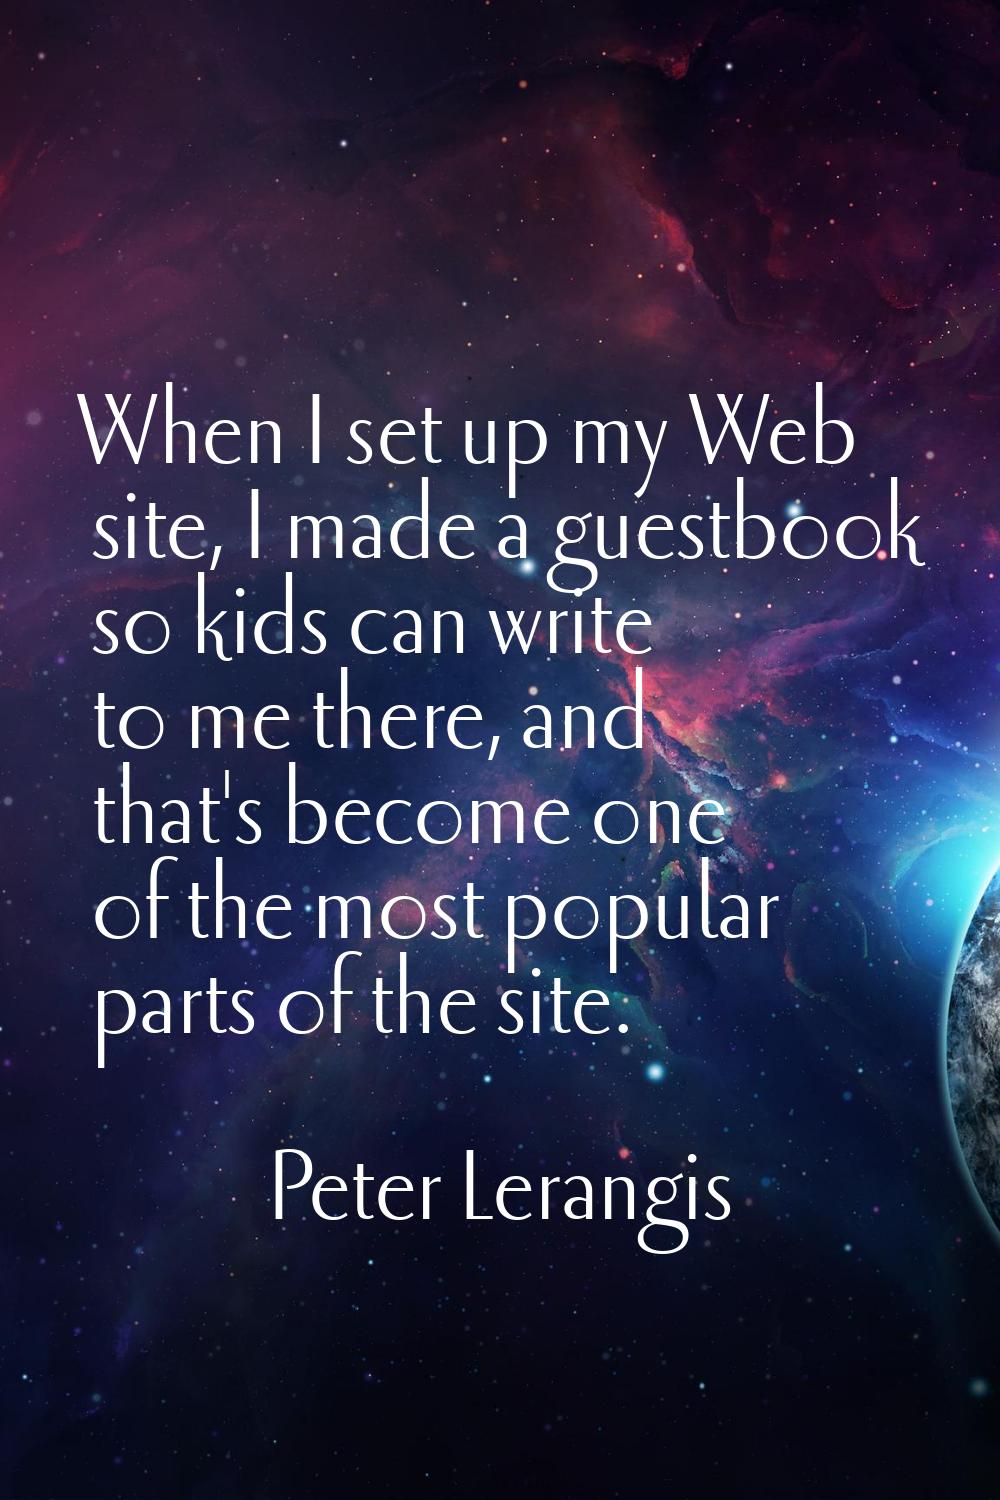 When I set up my Web site, I made a guestbook so kids can write to me there, and that's become one 